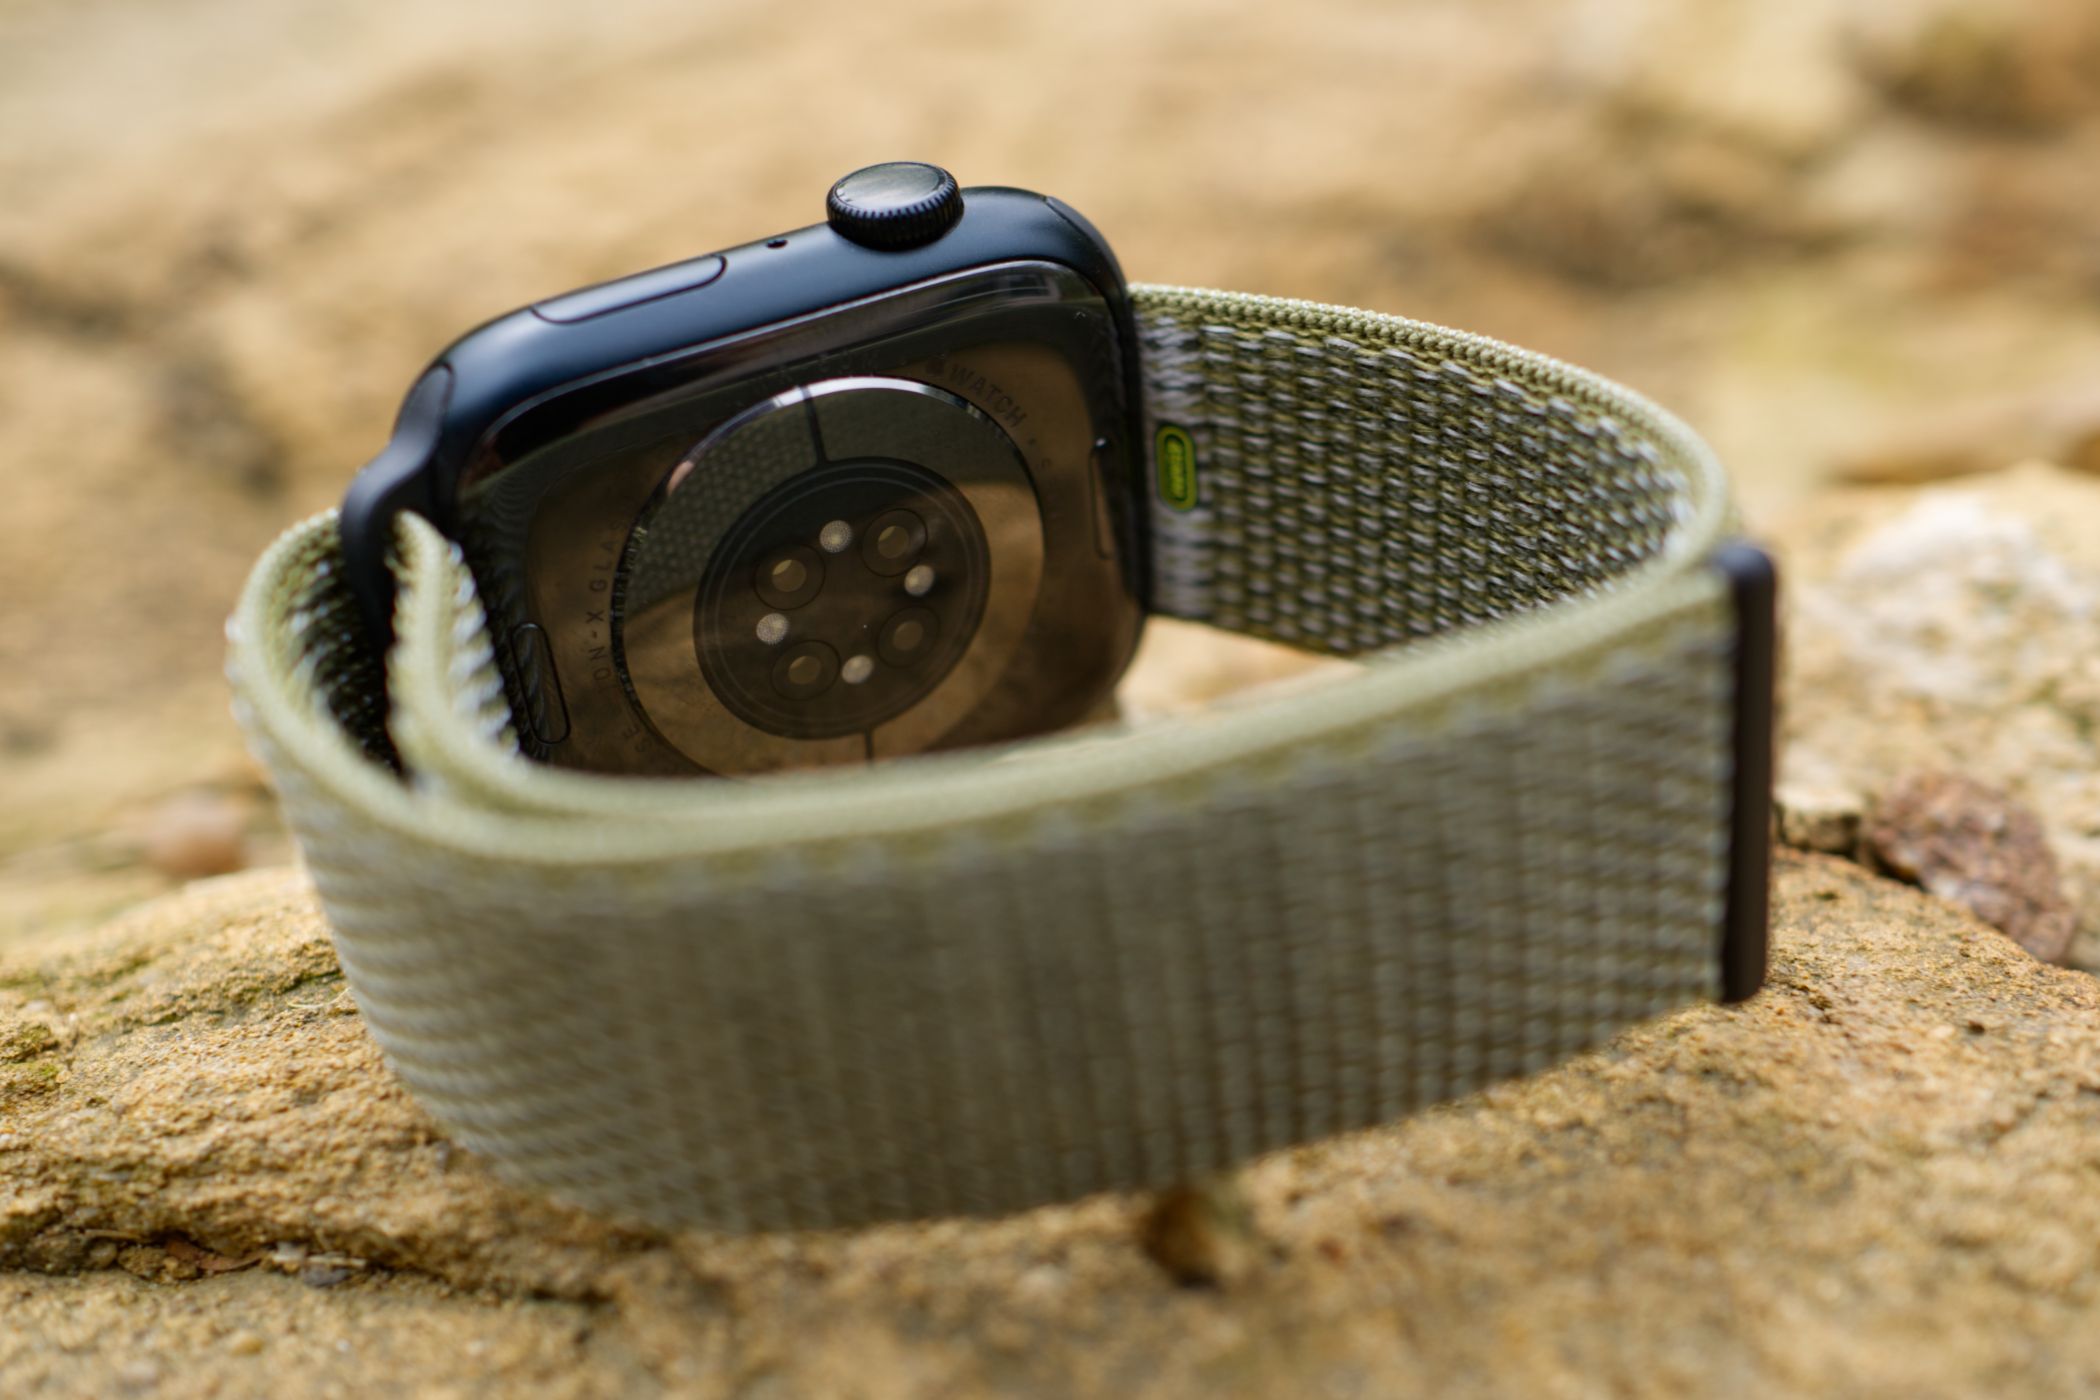 Apple Watch Series 8 with Nike Sports Loop band.